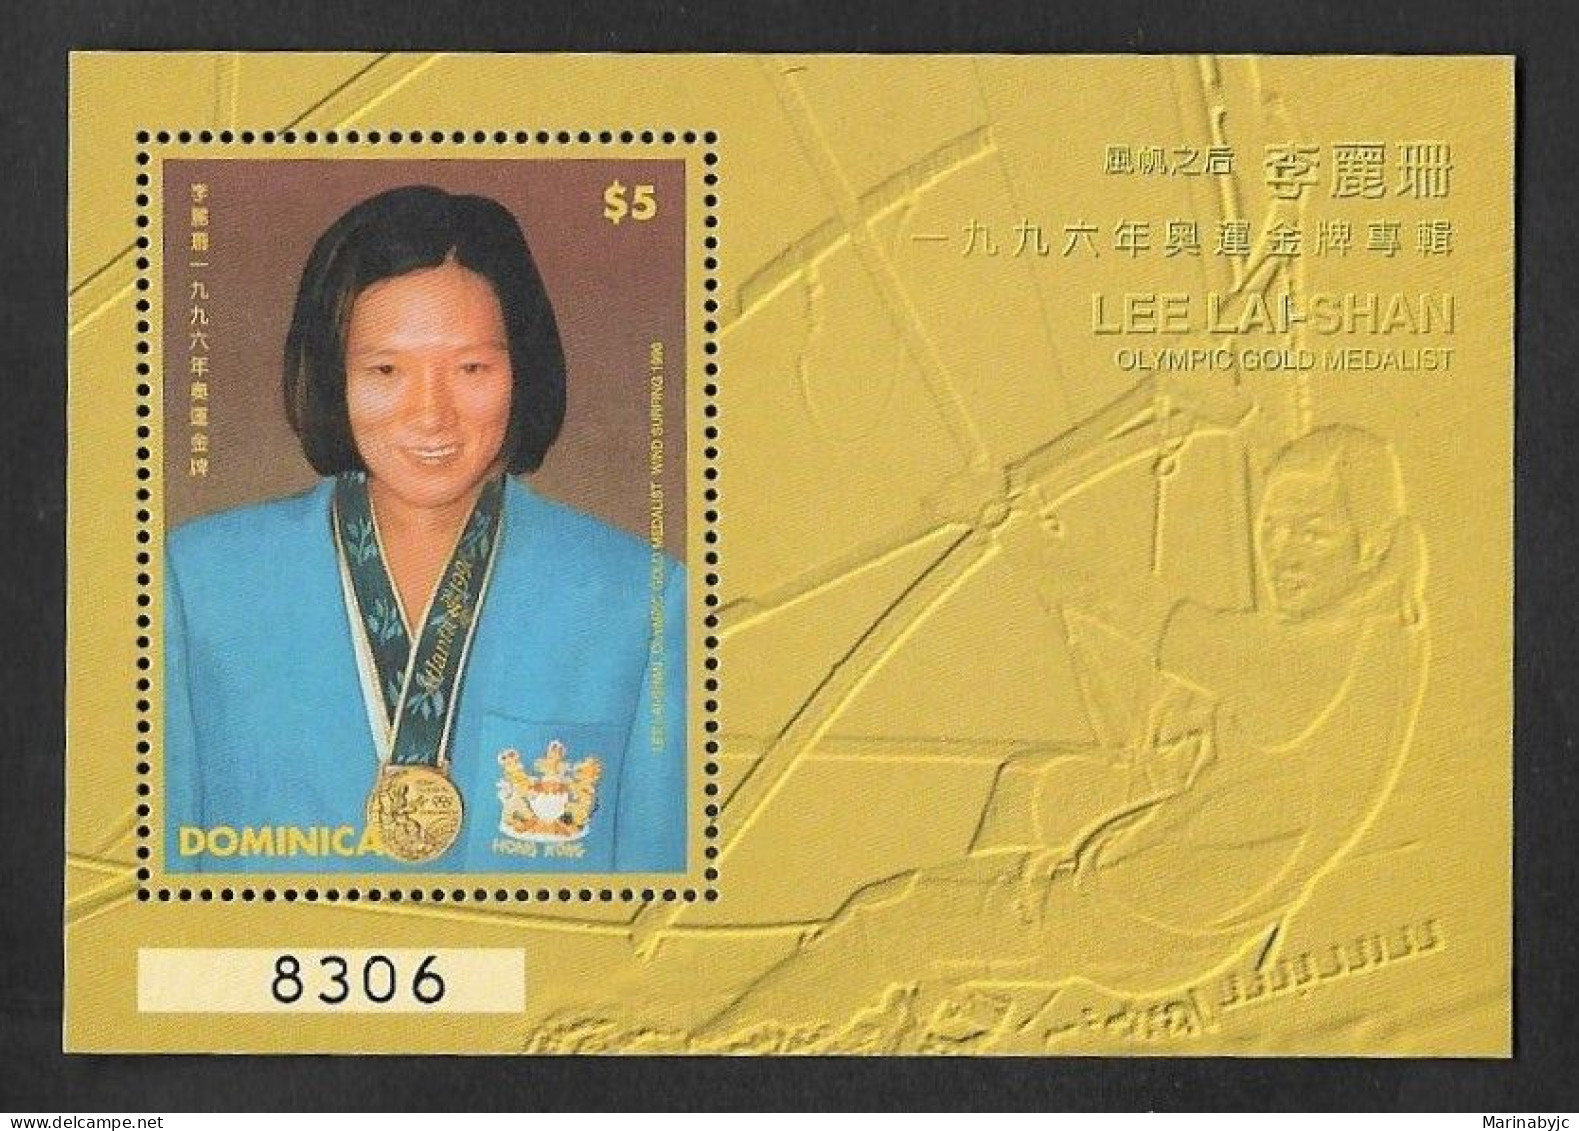 SE)1997 DOMINICA, FROM THE SPORTS SERIES, ATLANTA 96' OLYMPIC GAMES, TRIBUTE TO LEE LAI-SHAN, GOLD MEDALIST, SS, MNH - Dominica (1978-...)